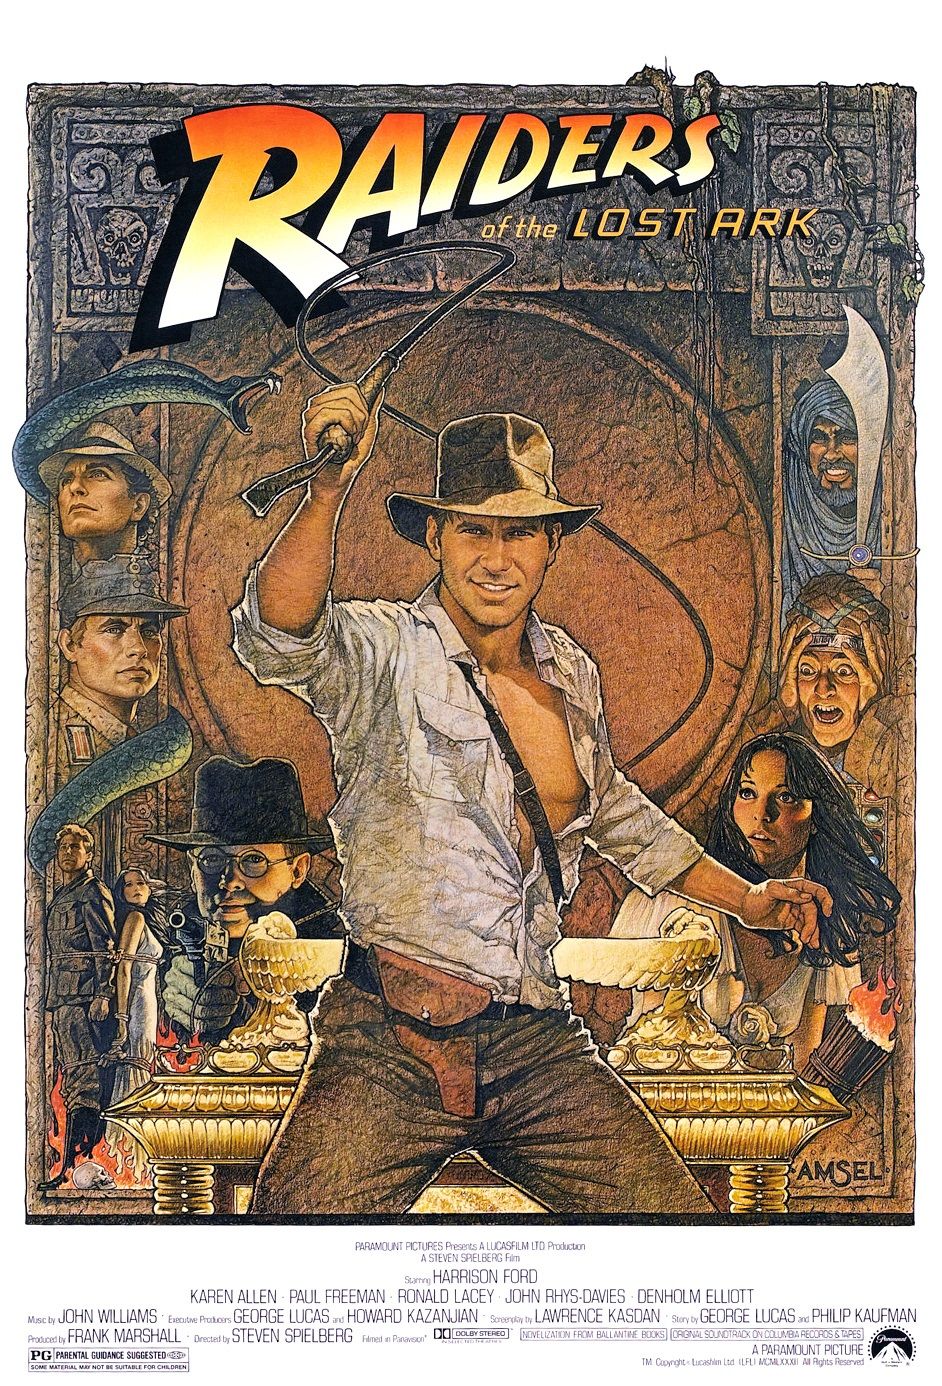 Indiana Jones and the Raiders of the Lost Ark Poster-1